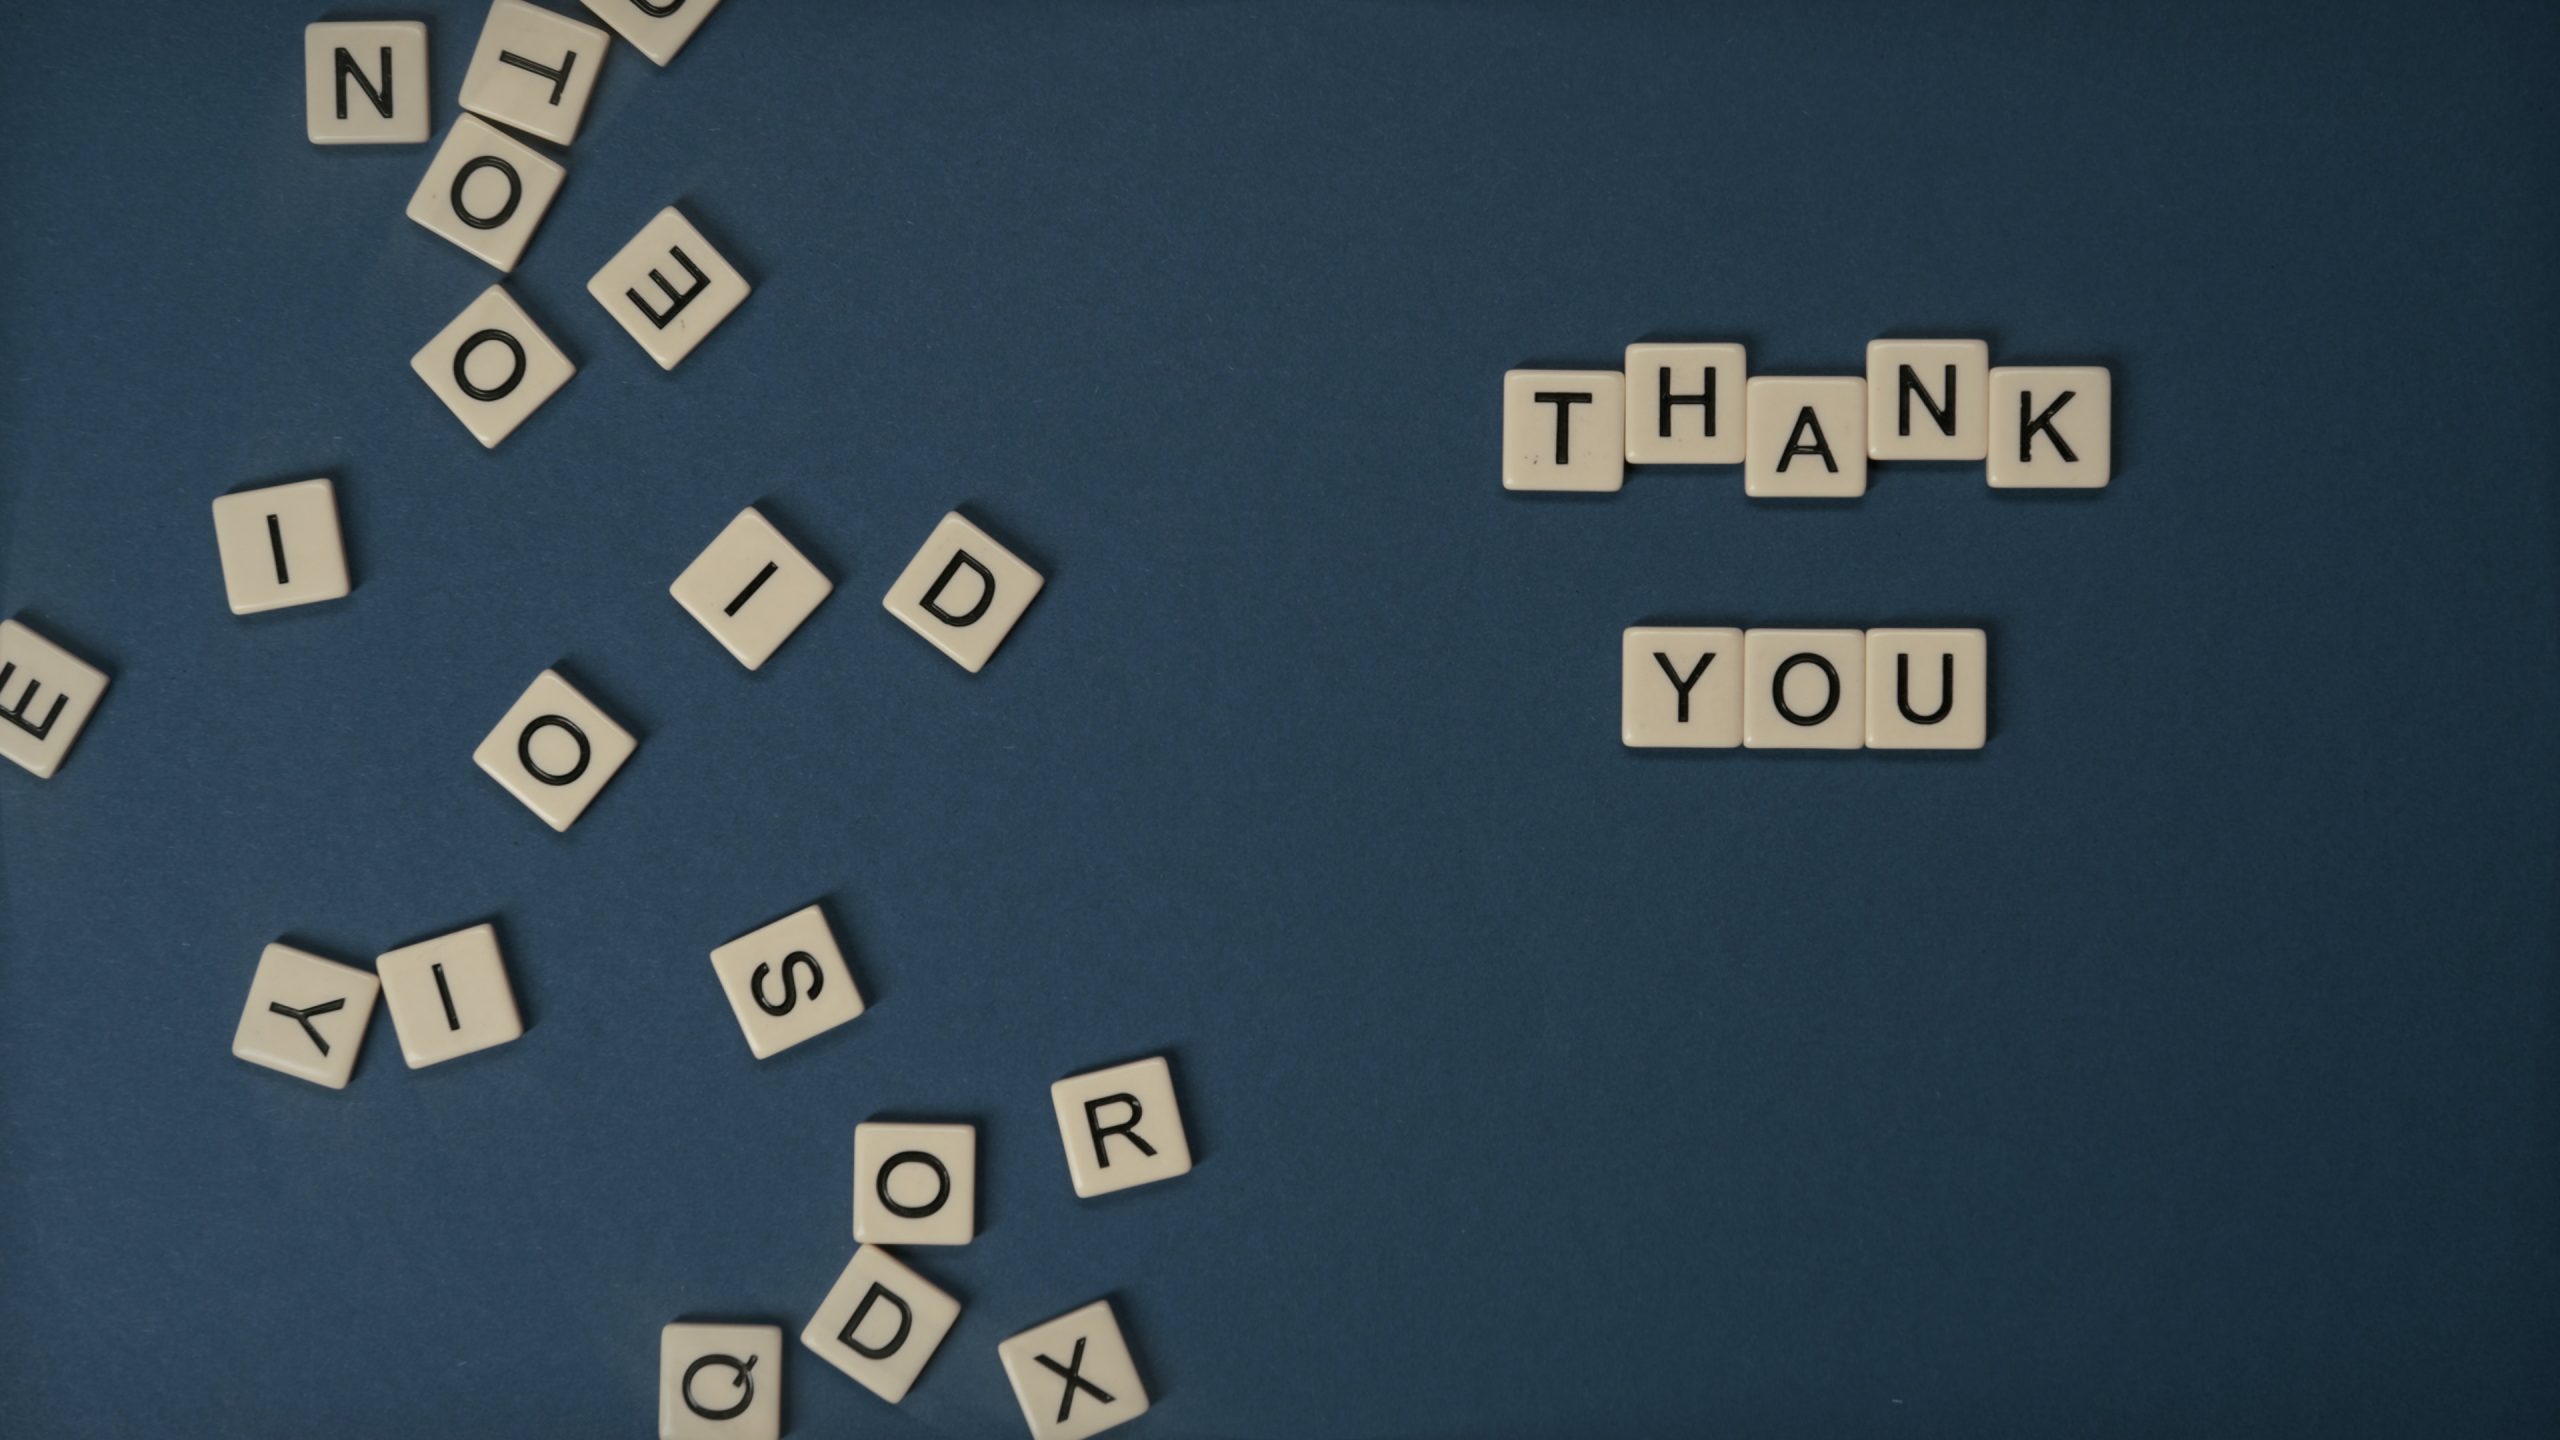 The Art of Saying “Thank You” to Customers